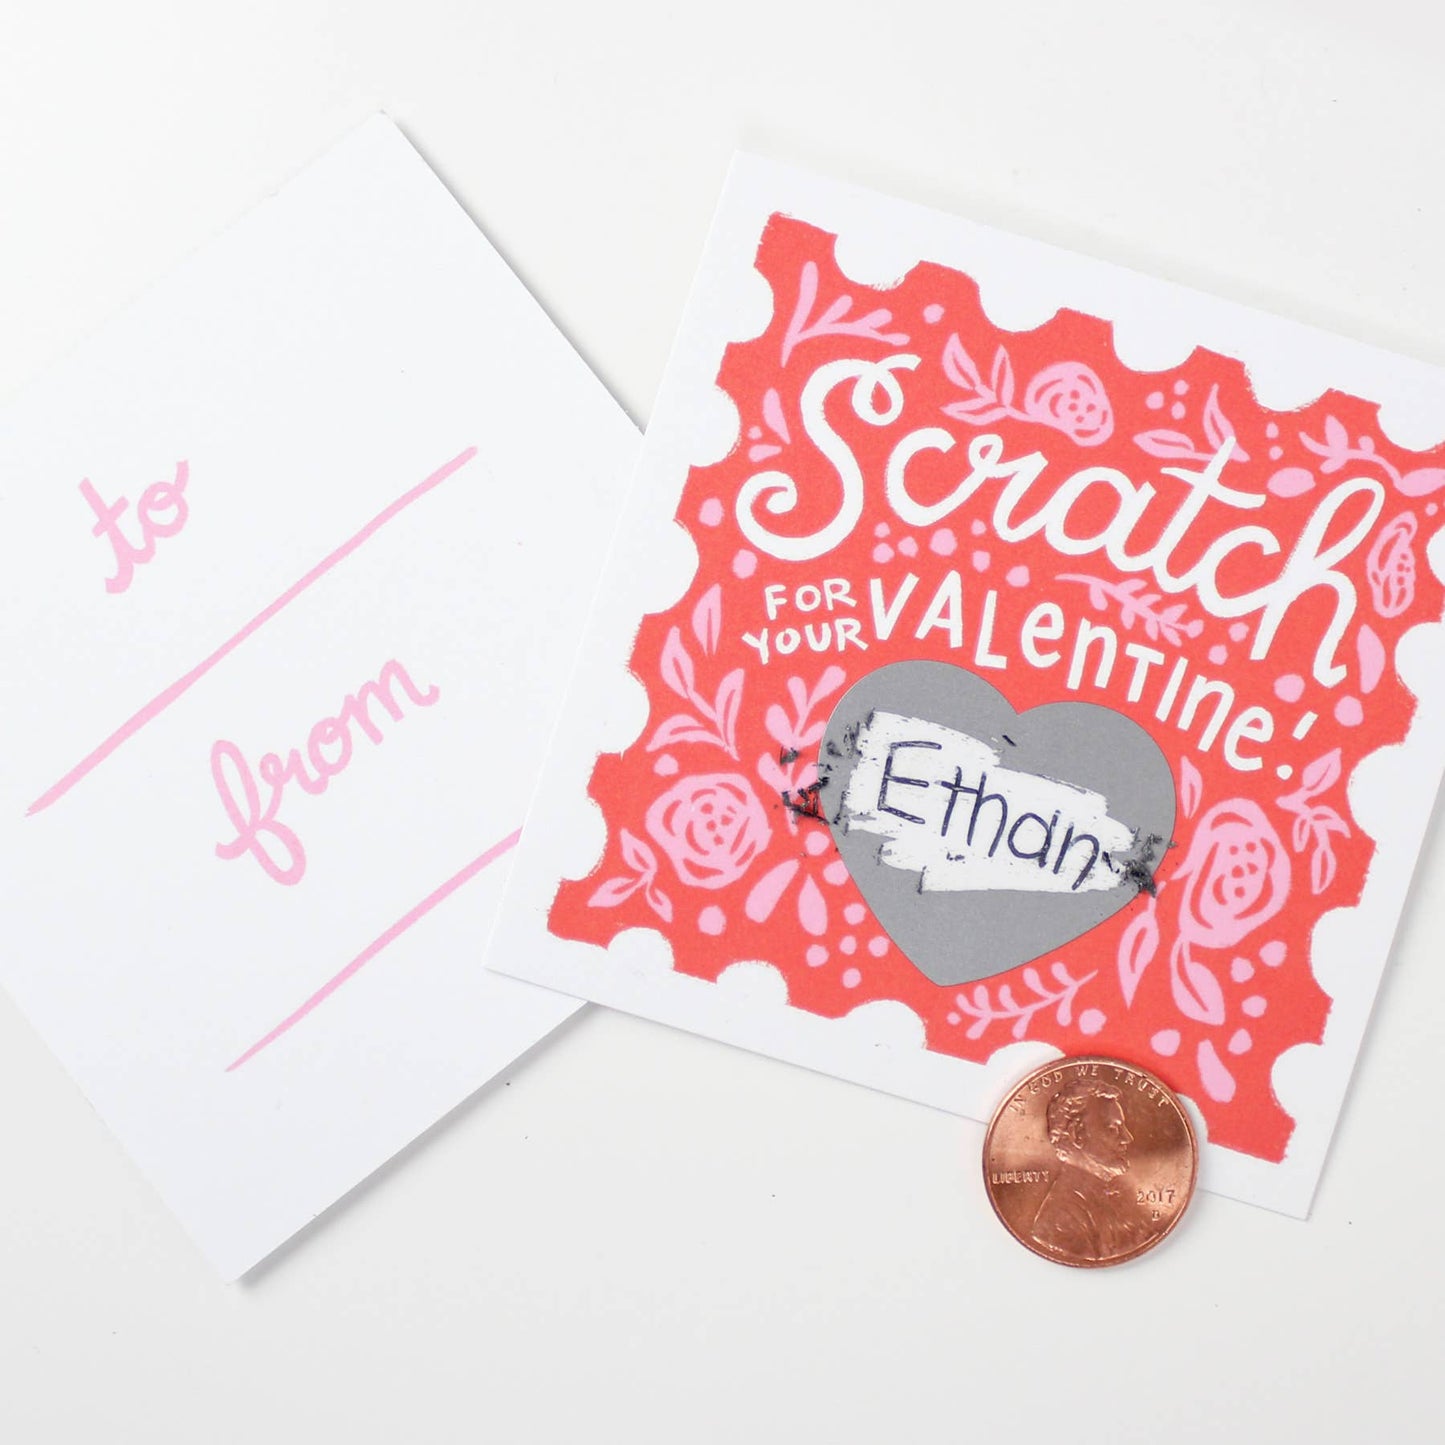 Scratch-off Valentines - Floral